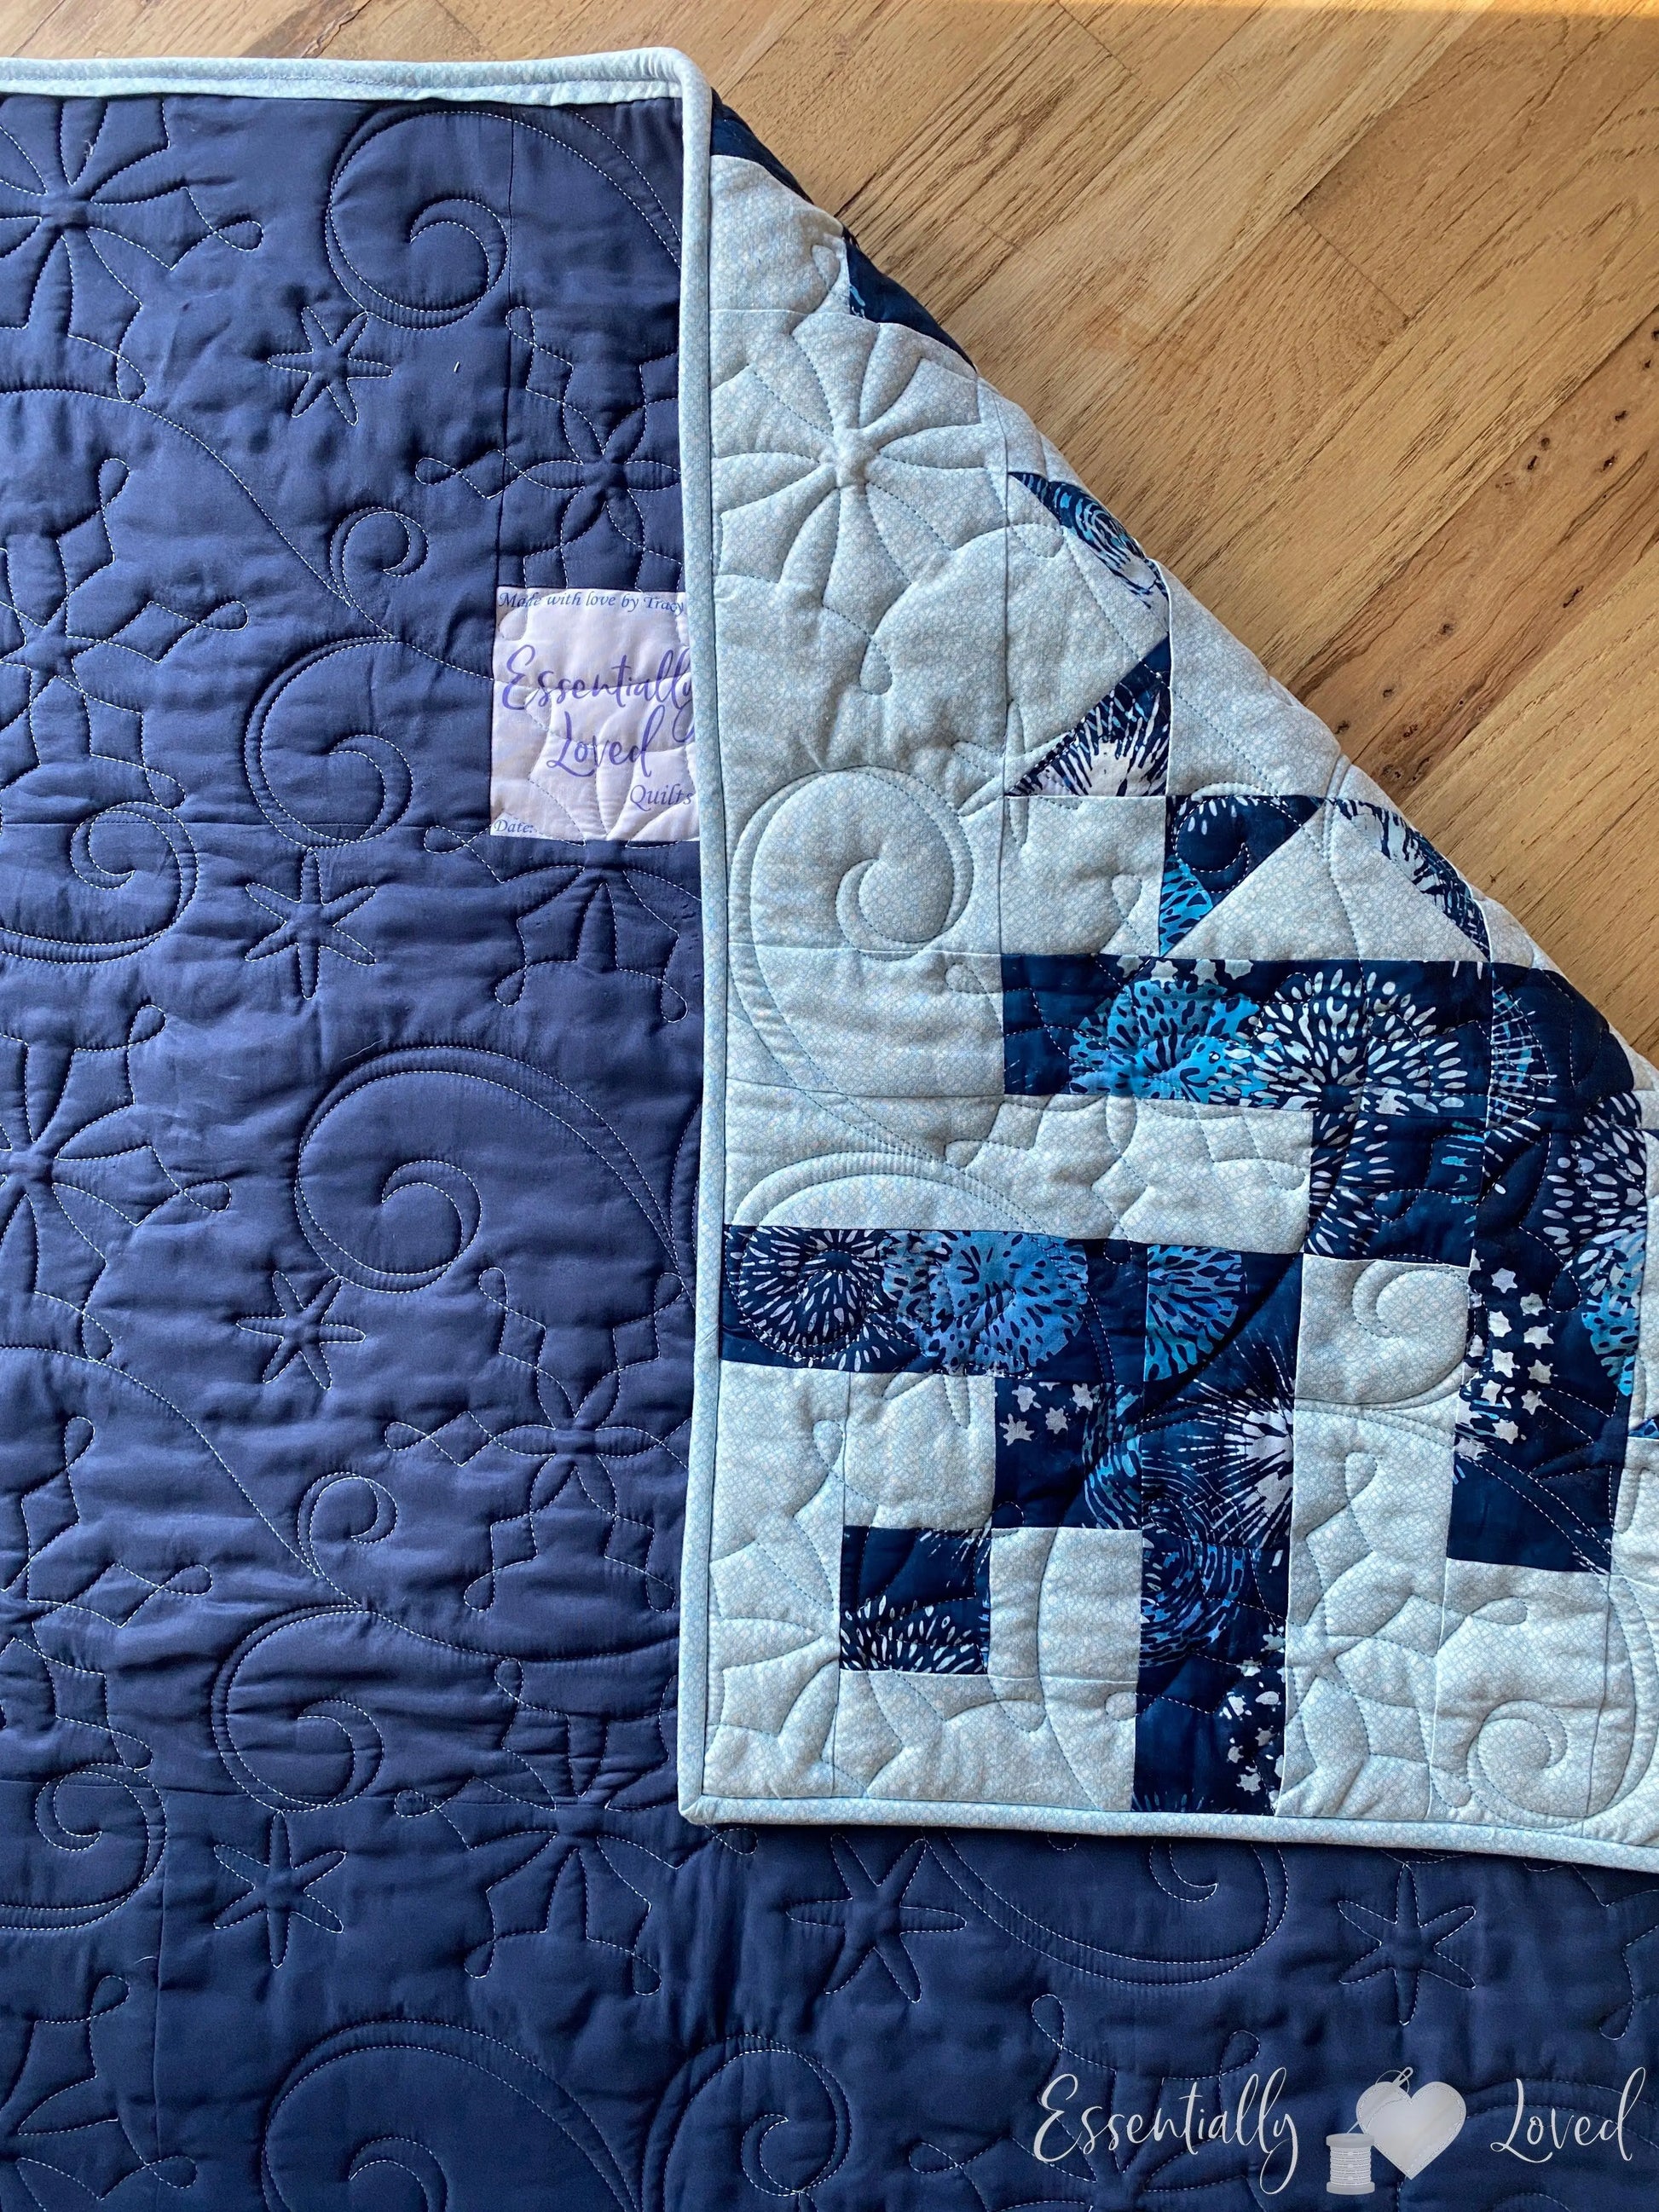 Snowflake Quilt - Essentially Loved Quilts